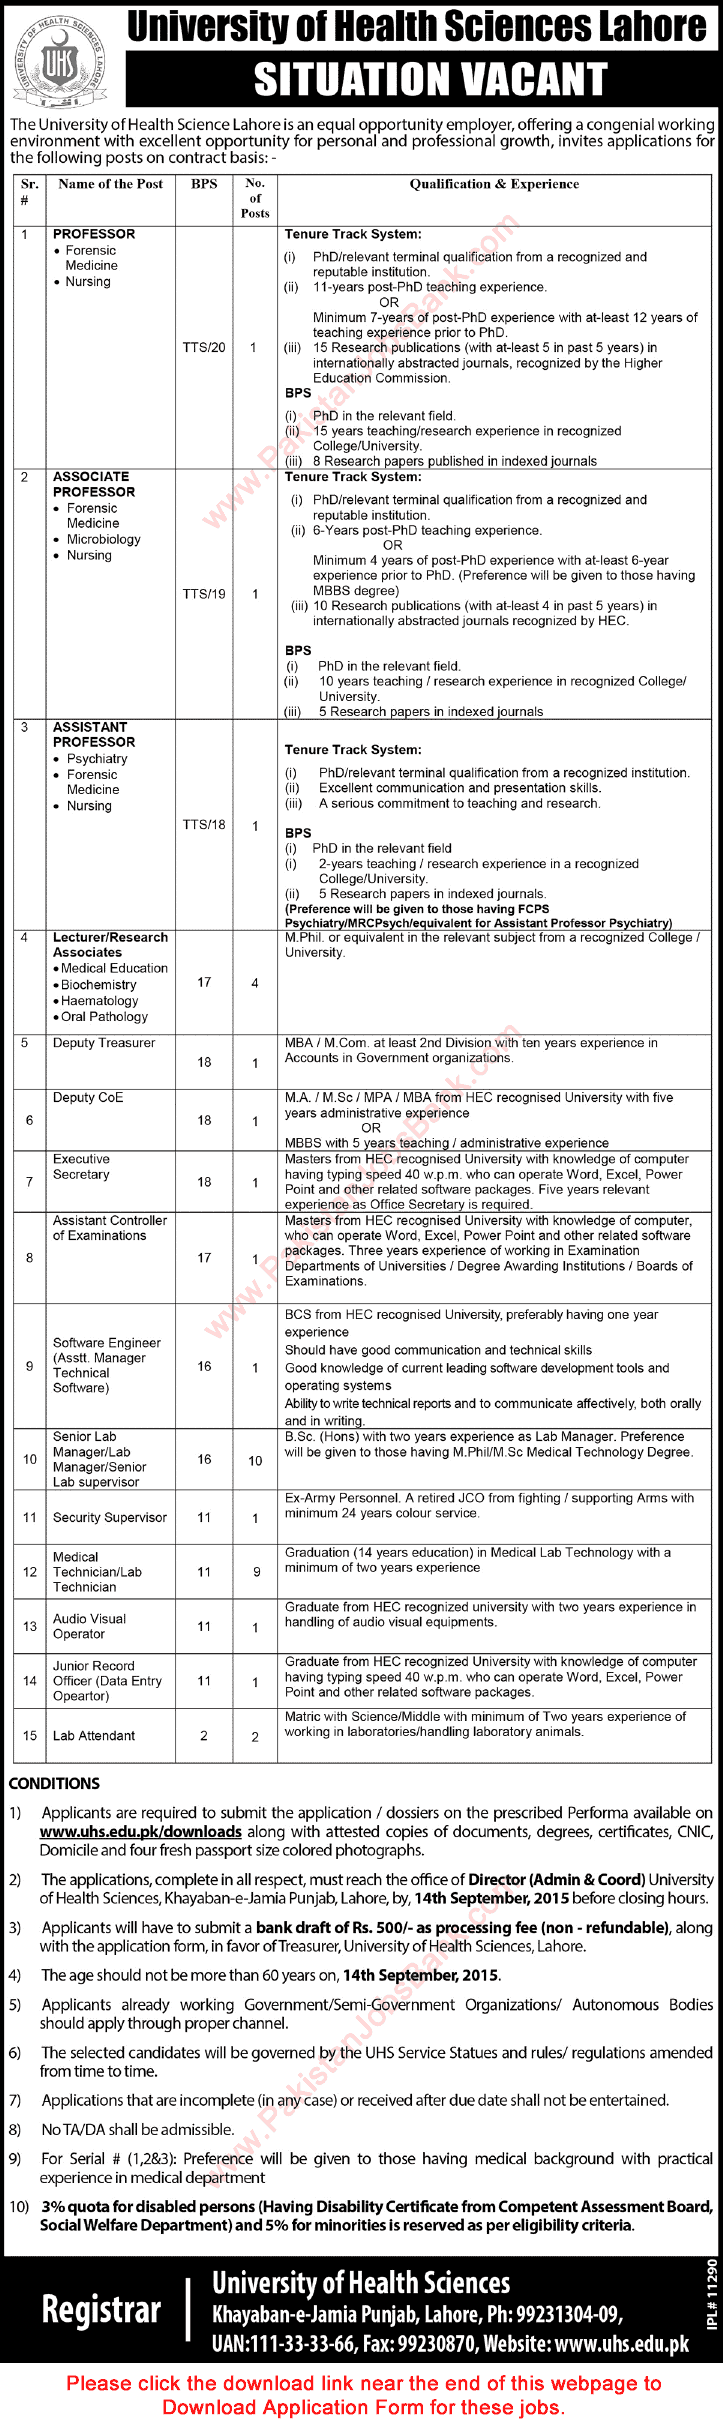 University of Health Sciences Lahore Jobs 2015 August Application Form Teaching Faculty & Admin Staff